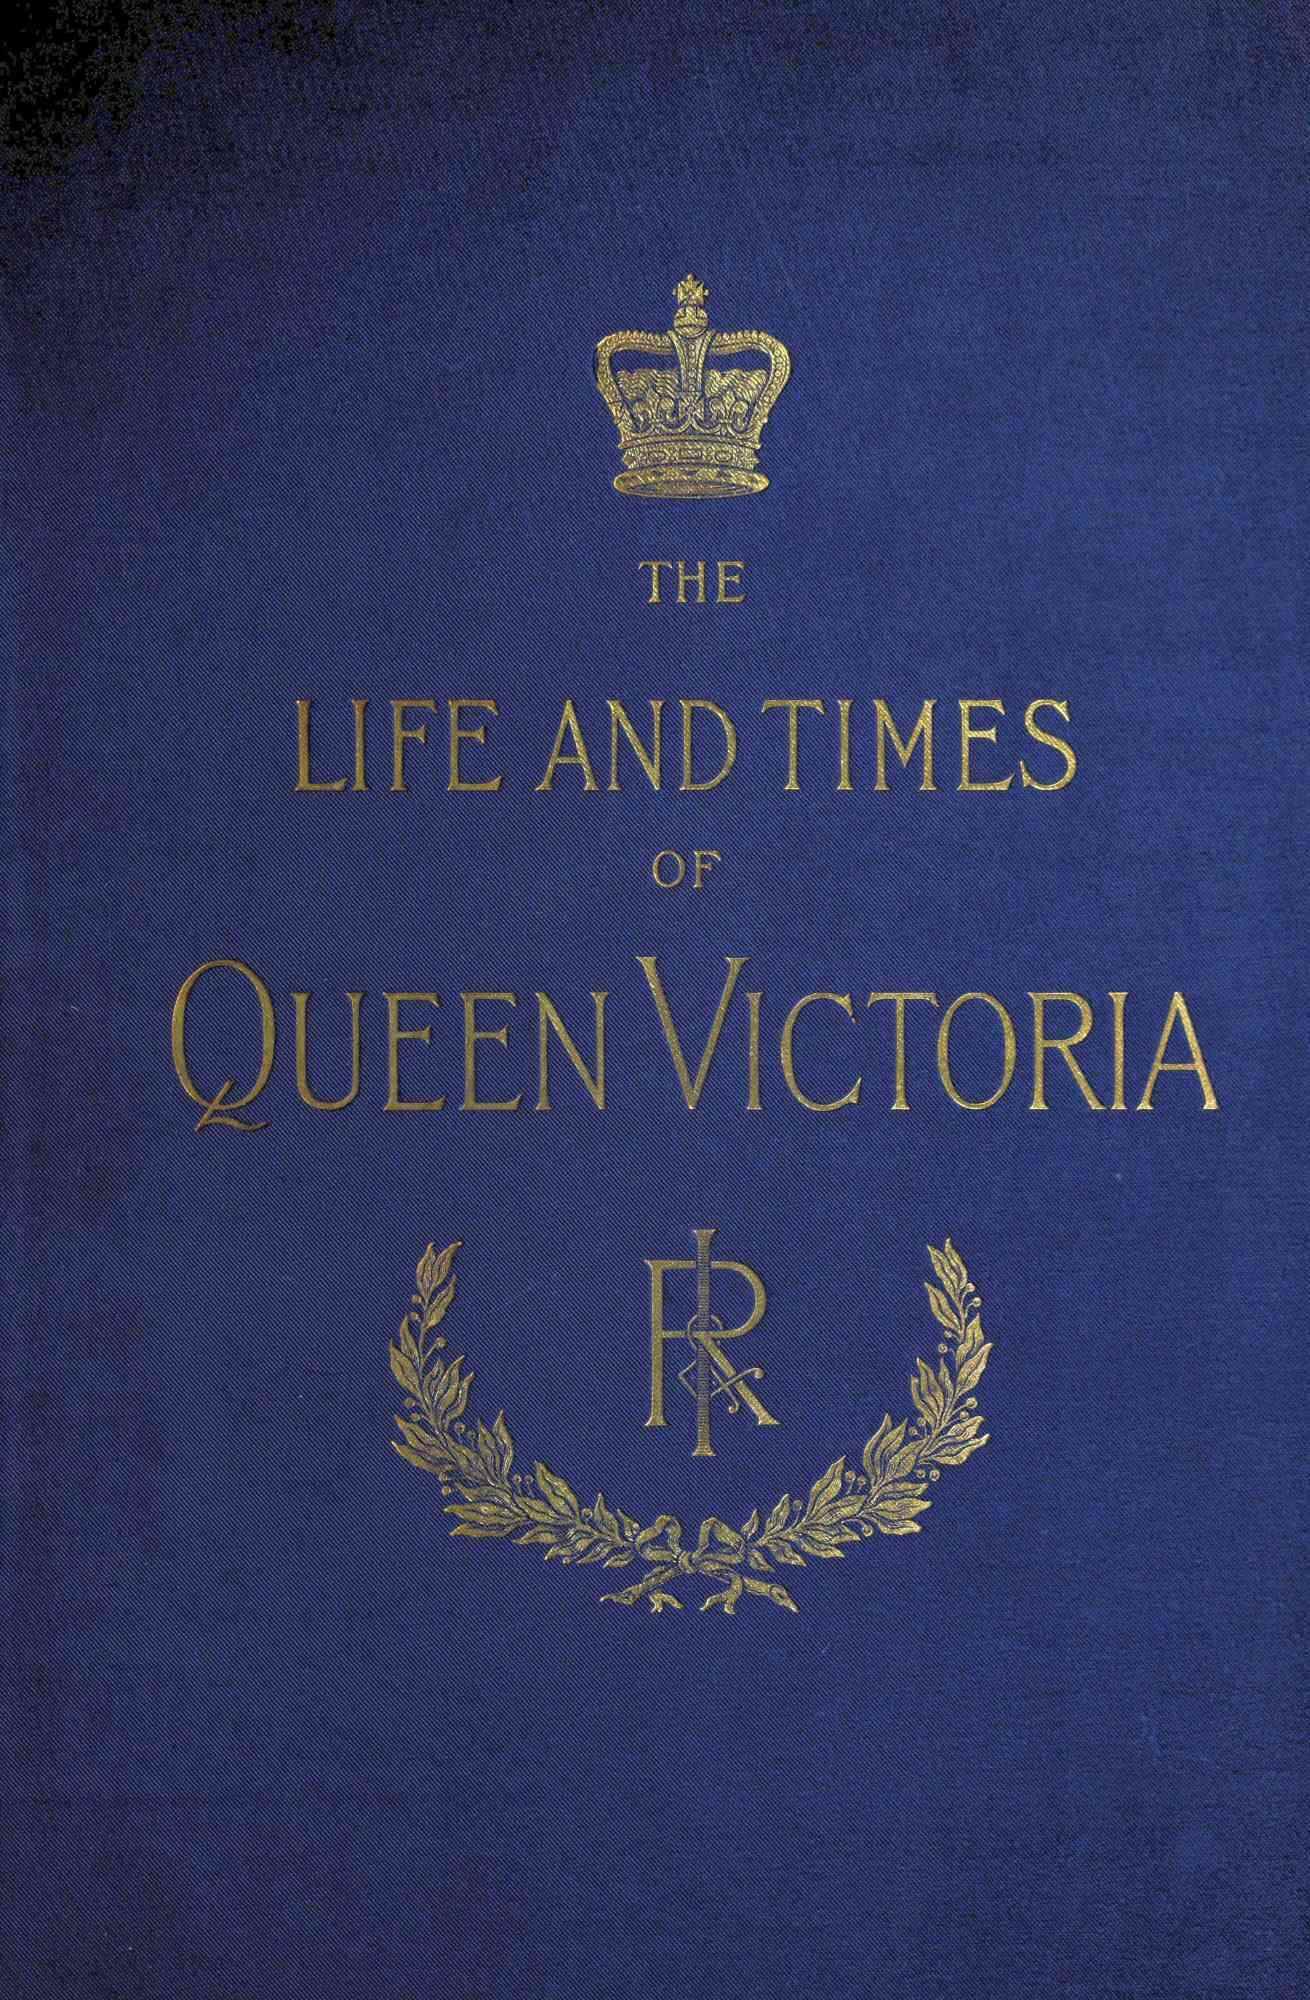 The Life and Times of Queen Victoria; hq nude photo